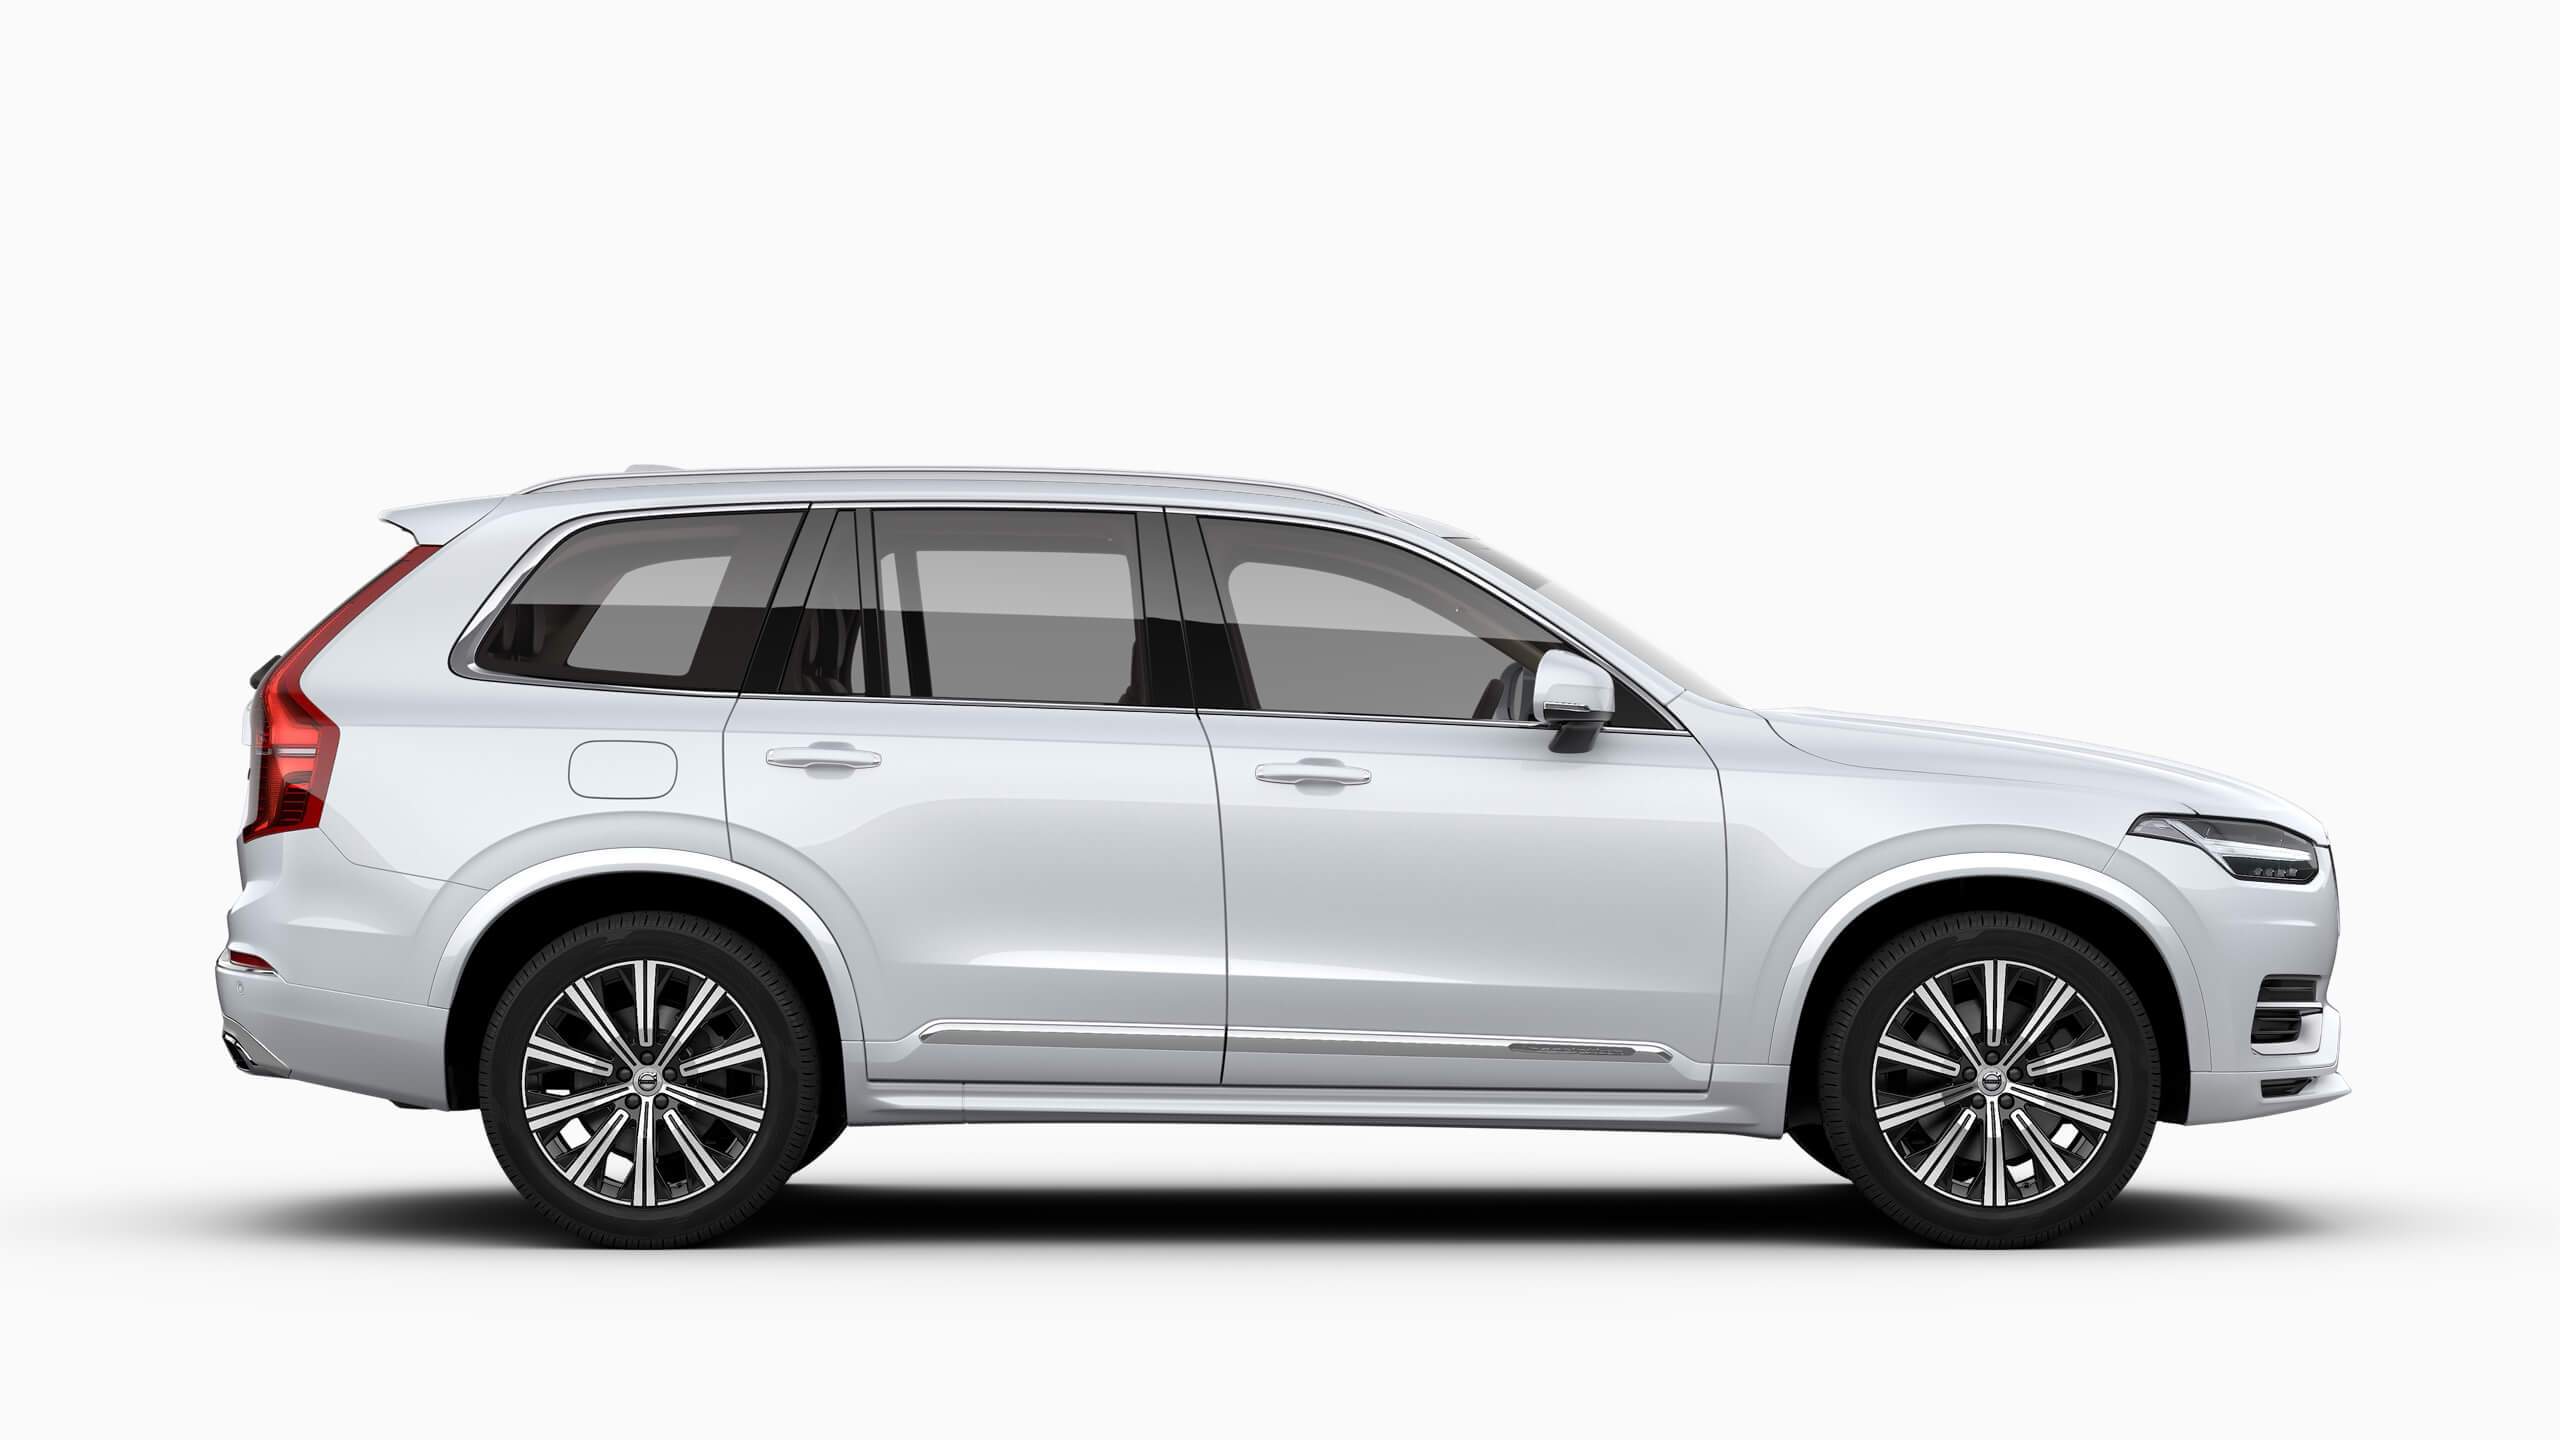 01_Crystal_White_pearl_707_XC90